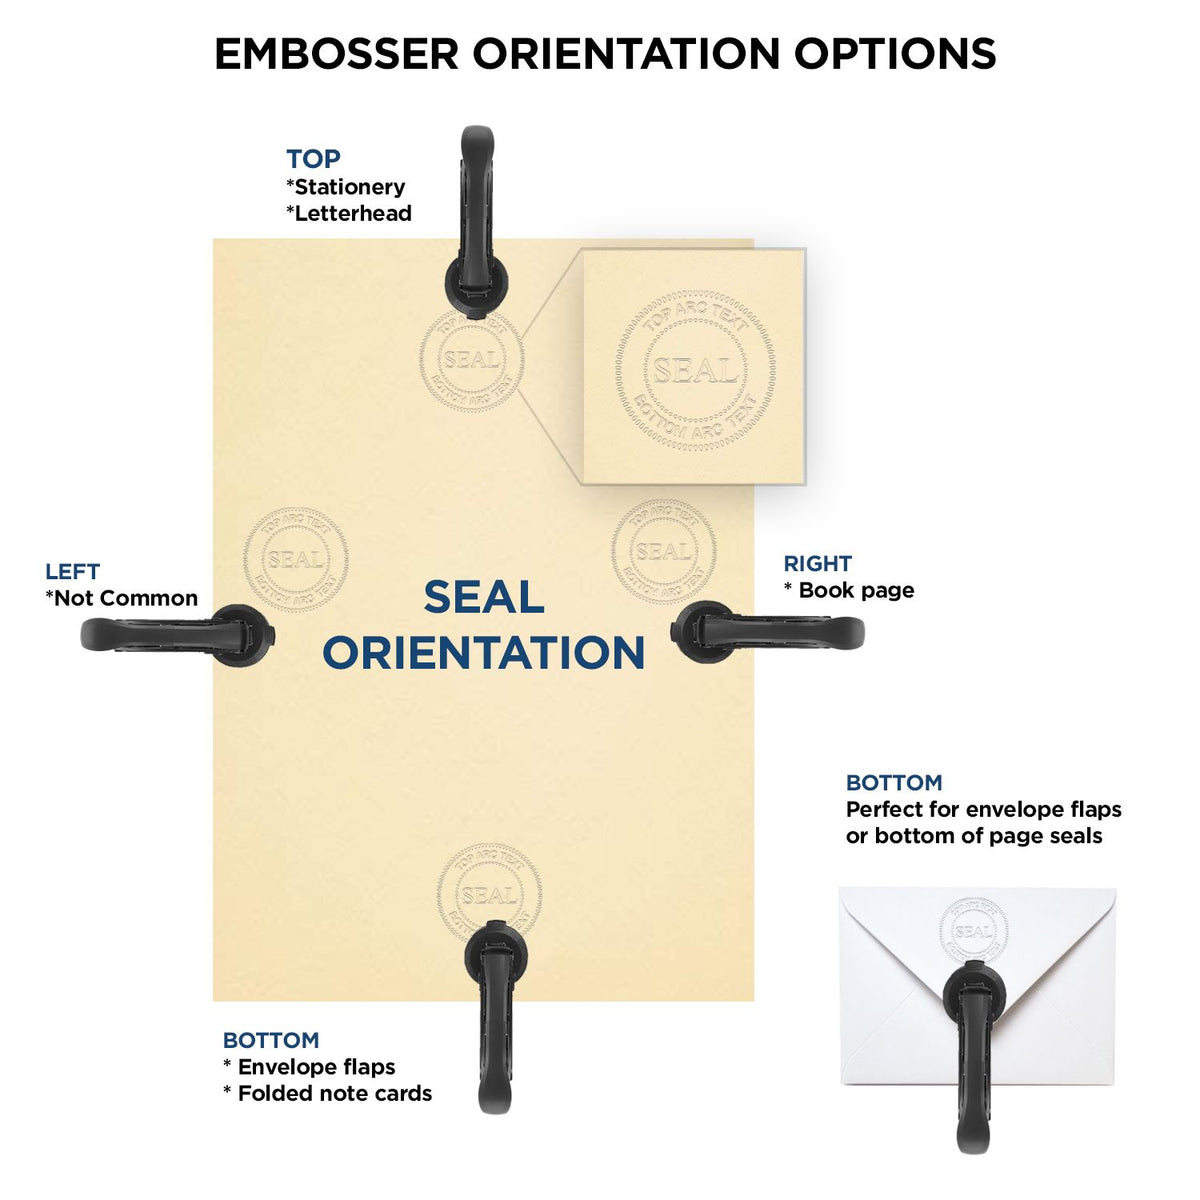 An infographic for the Handheld North Dakota Architect Seal Embosser showing embosser orientation, this is showing examples of a top, bottom, right and left insert.